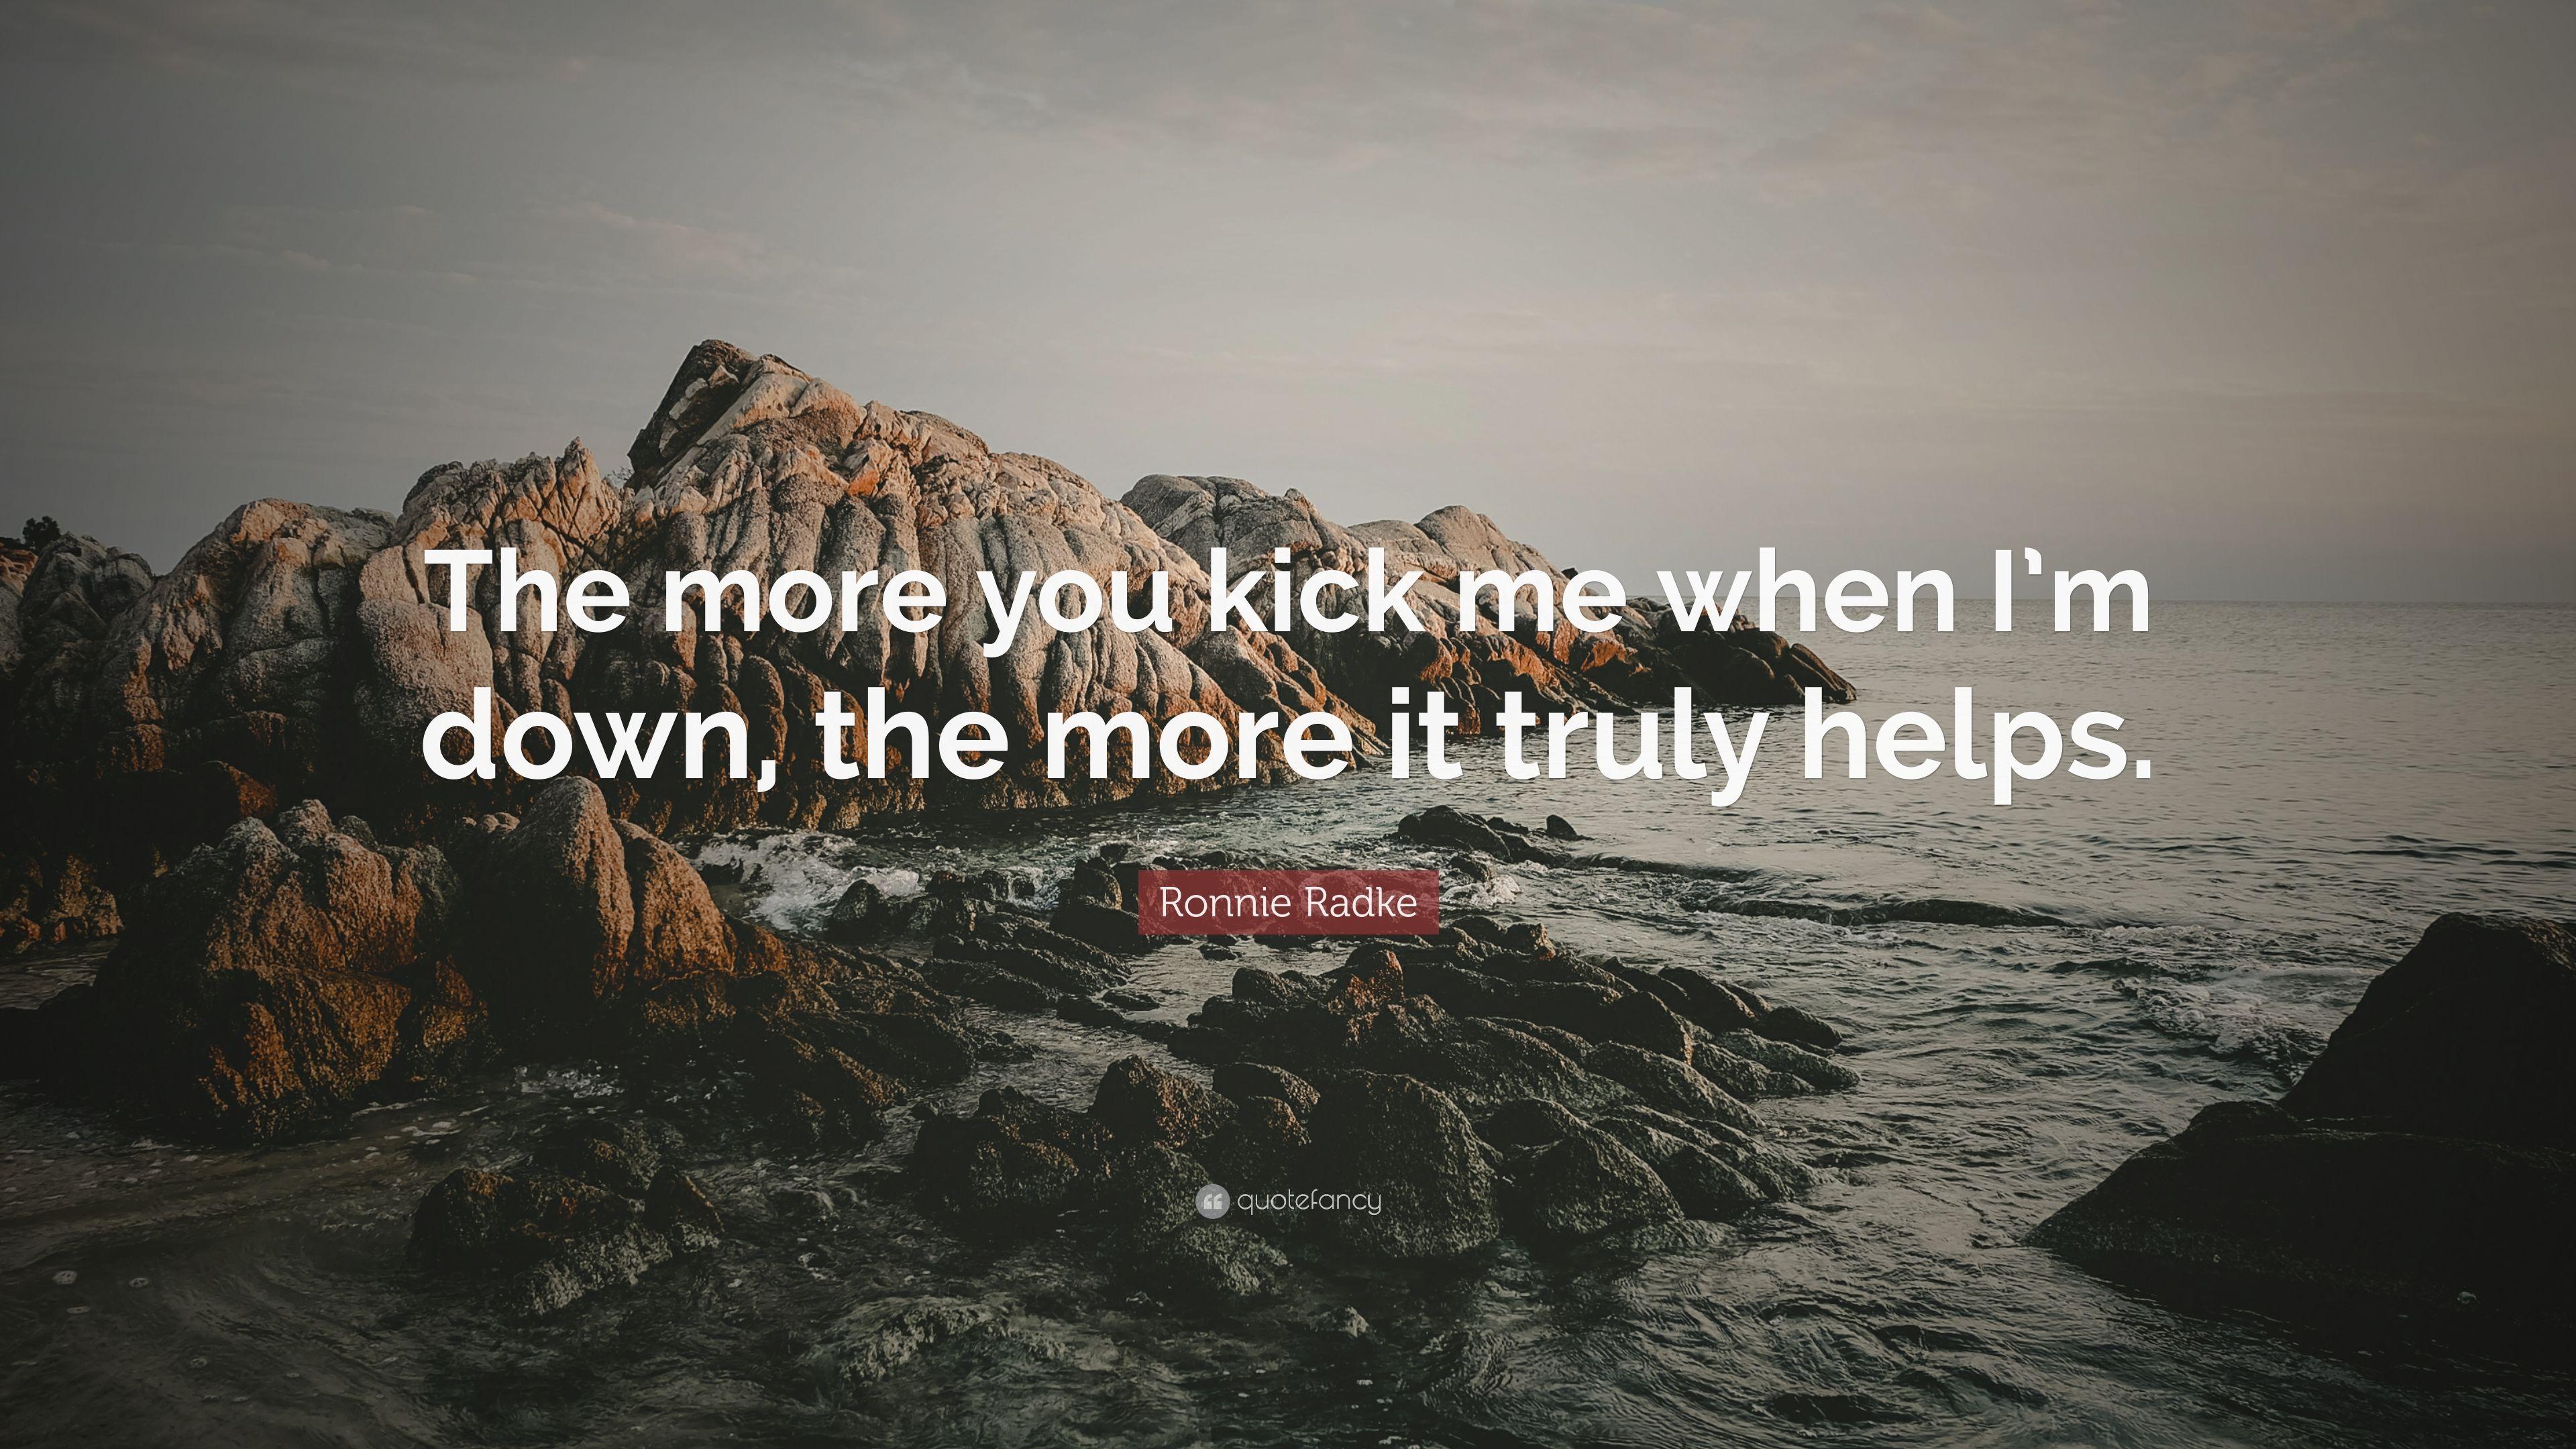 Ronnie Radke Quote: “The more you kick me when I'm down, the more it